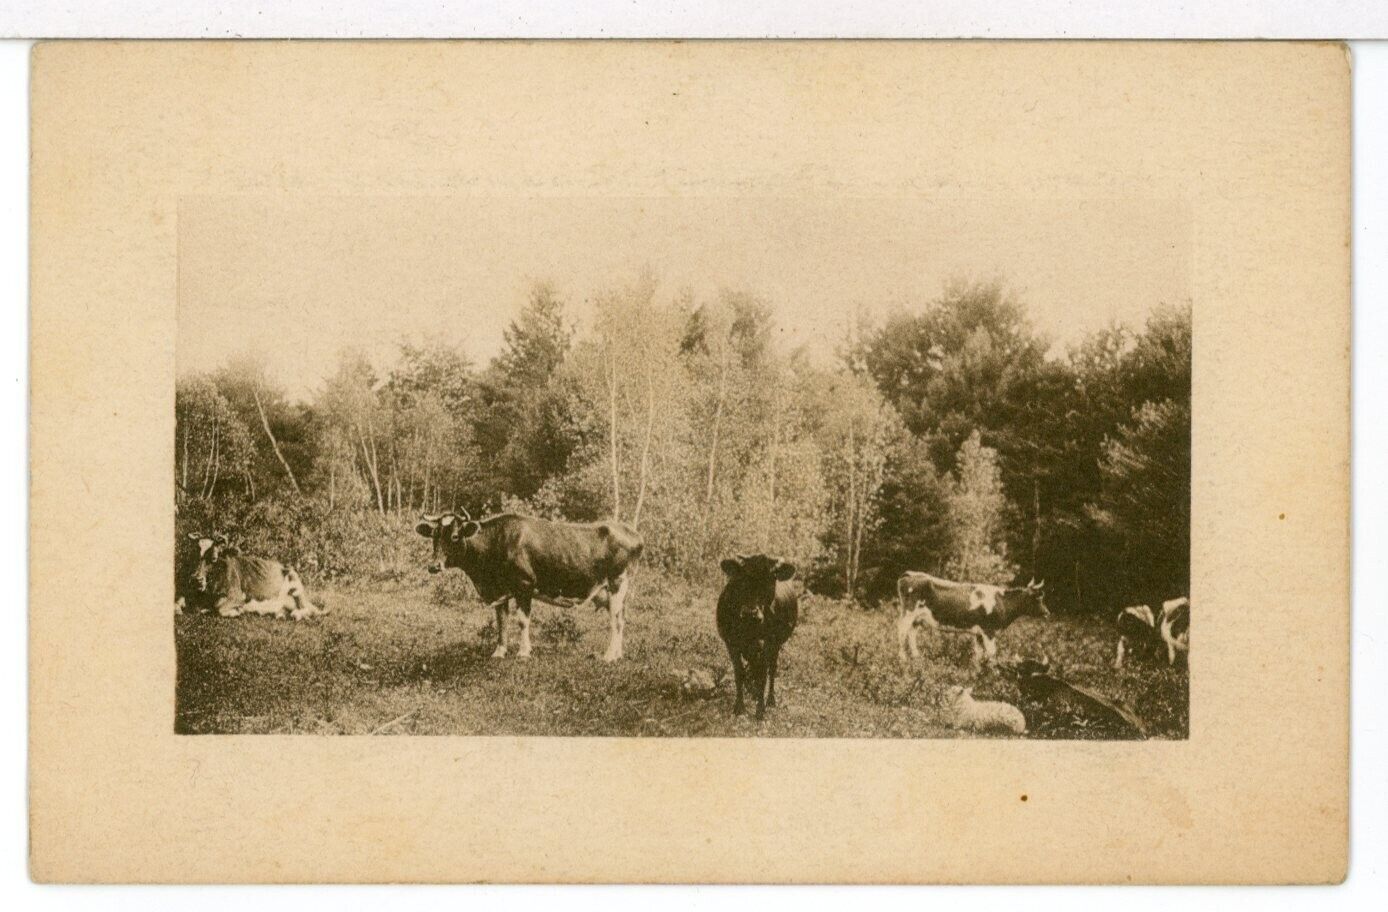 1909 - RPPC - Embossed Frame - Cows in a Field, Postmarked, Sent to Milford IN